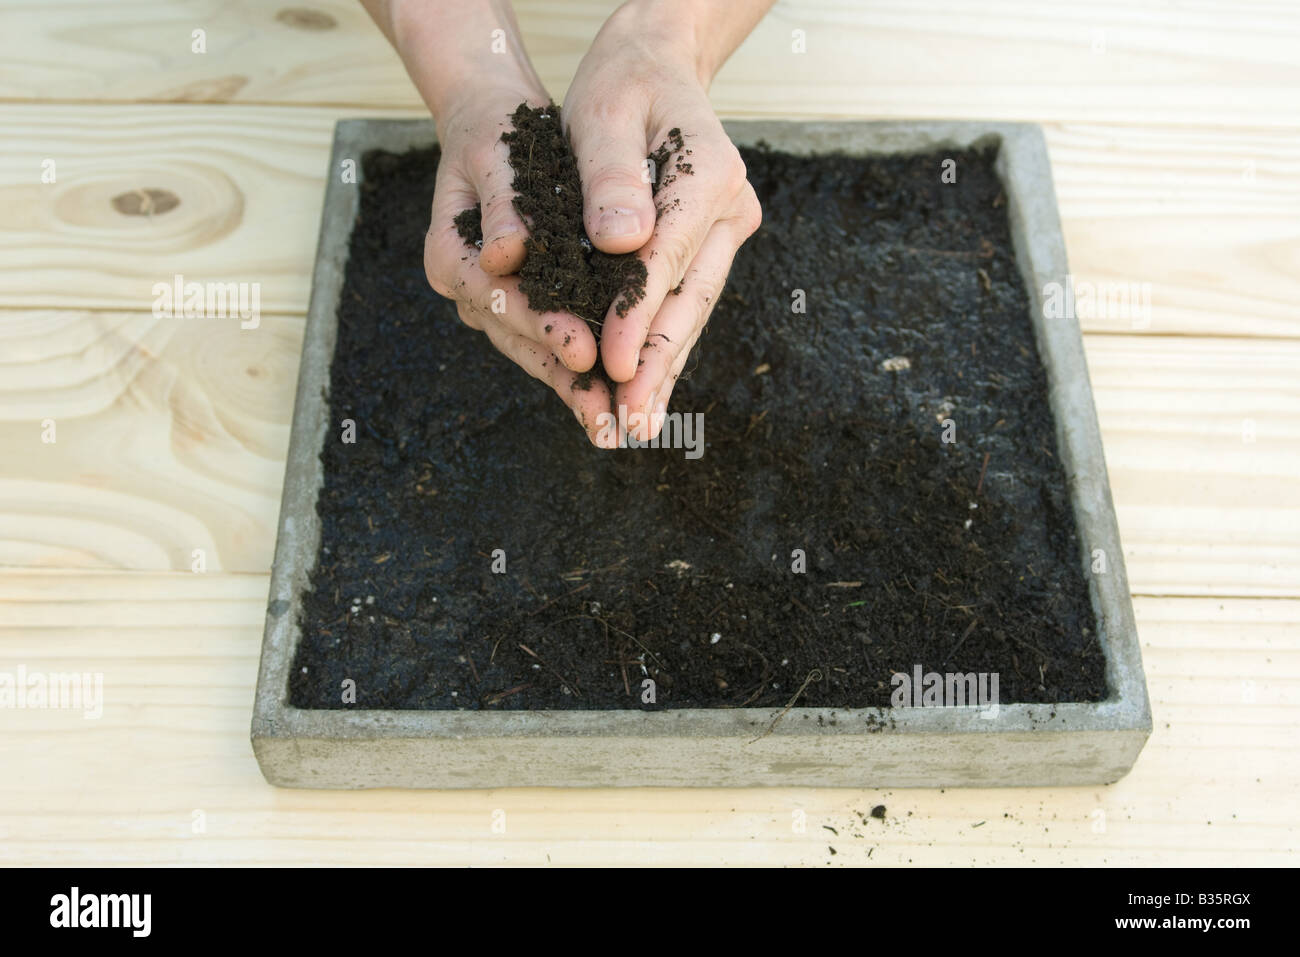 Handful of gardening soil above a tray full of dirt Stock Photo